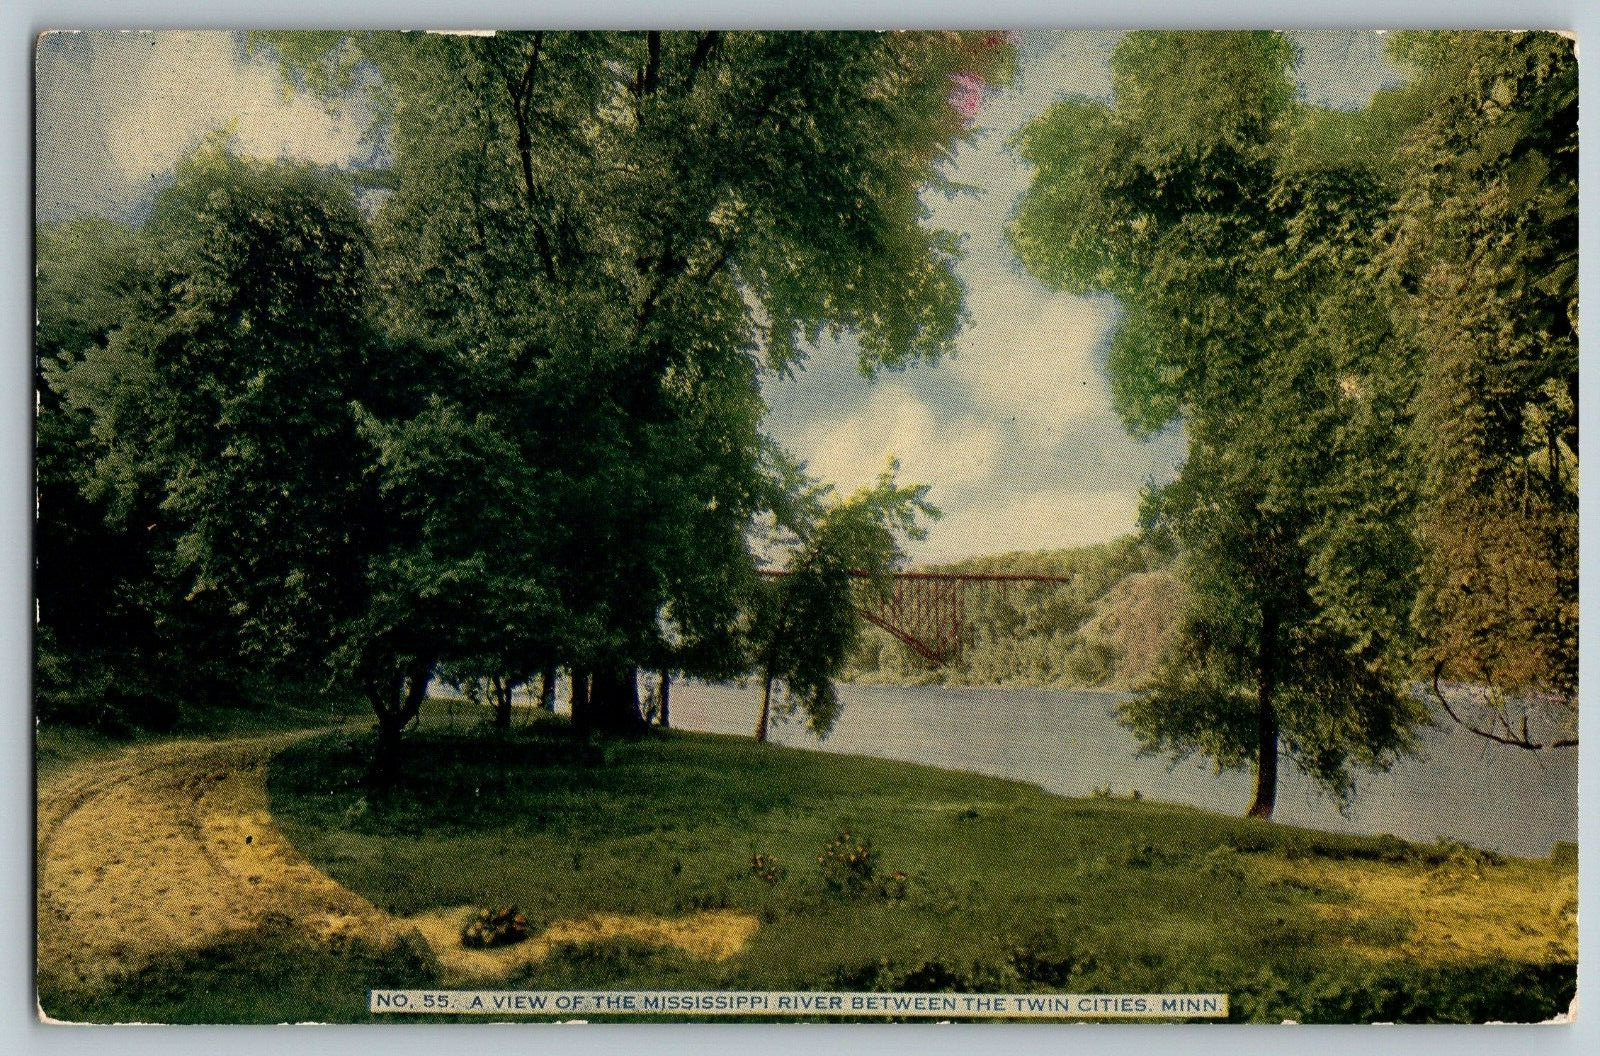 Minnesota - A View of Mississippi River Bet the Twin Cities - Vintage Postcard